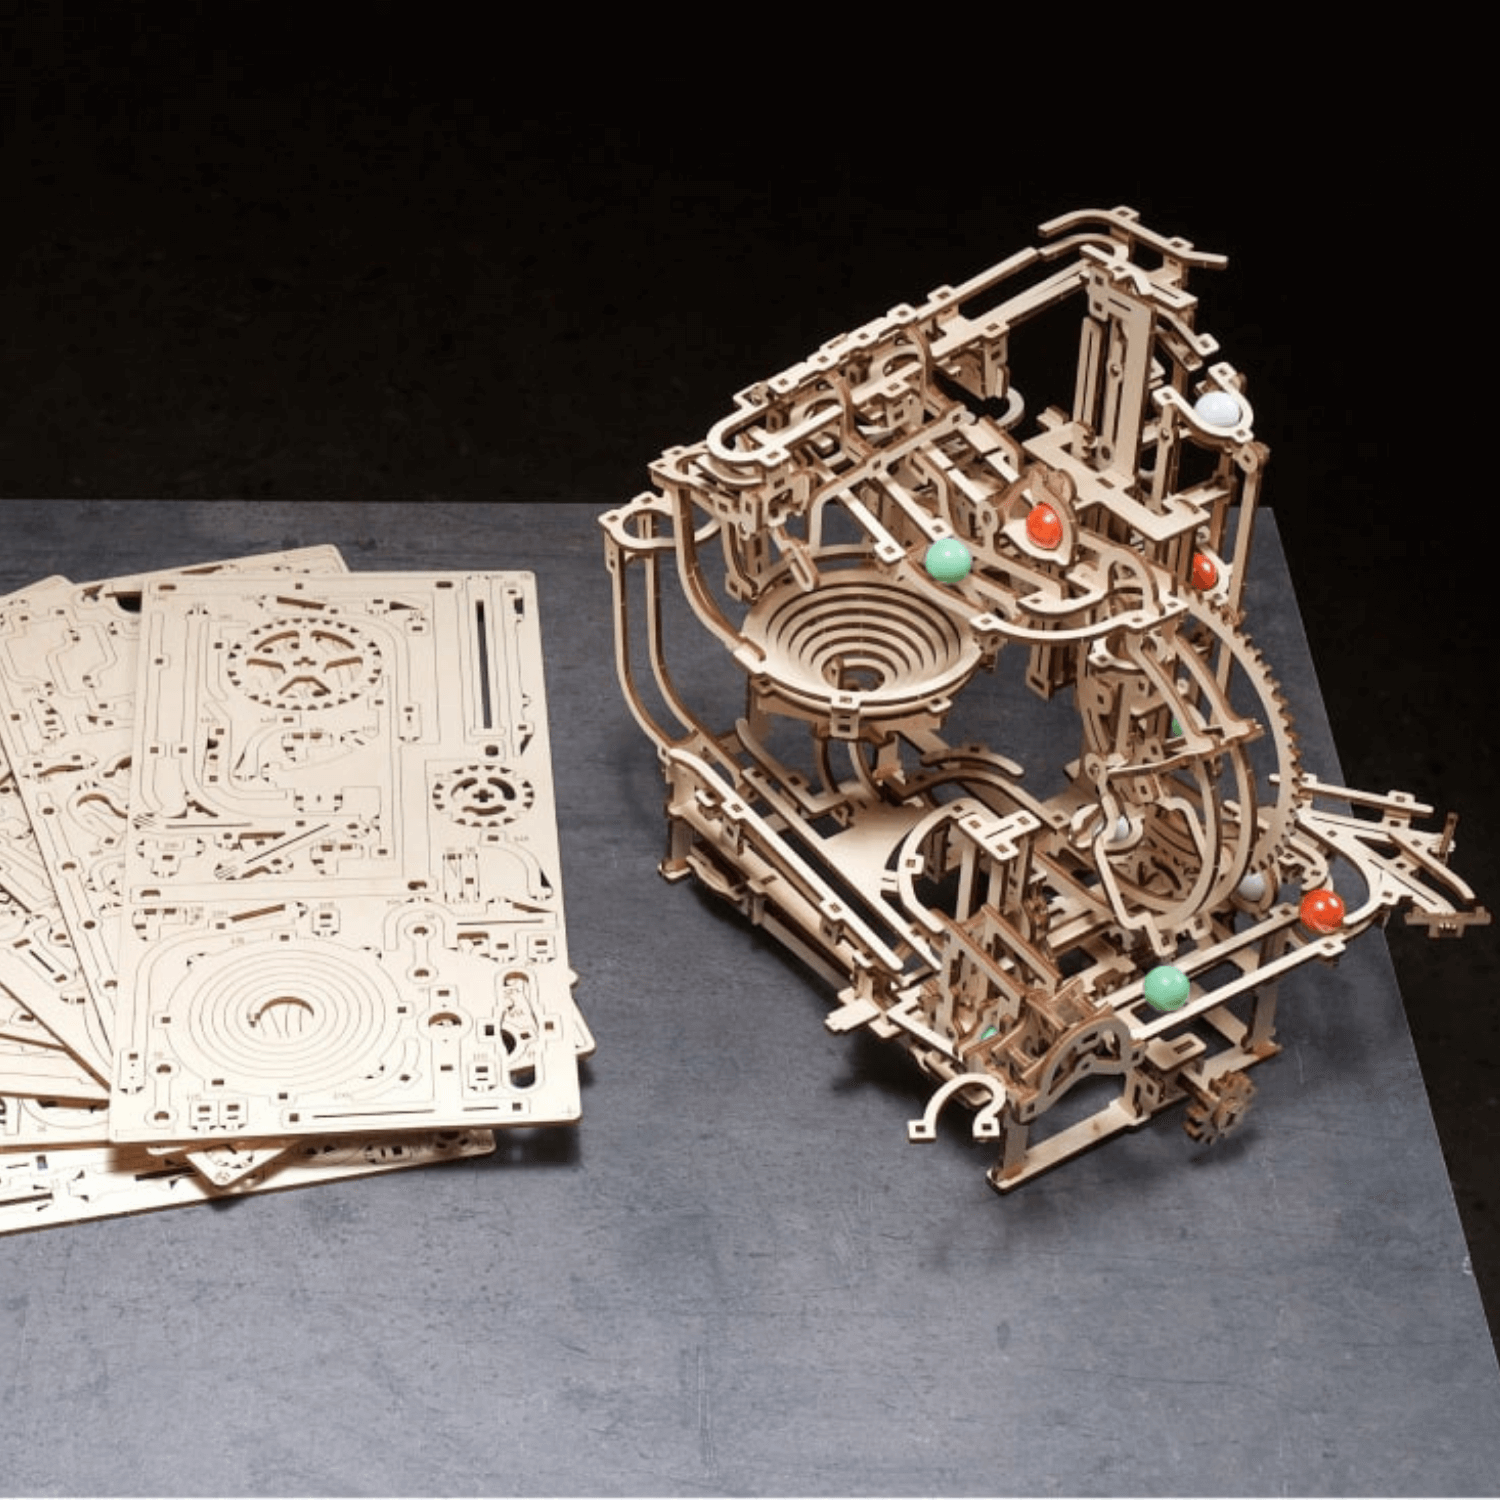 Marble Stairway Model Kit-Mechanical Wooden Puzzle-Ugears--